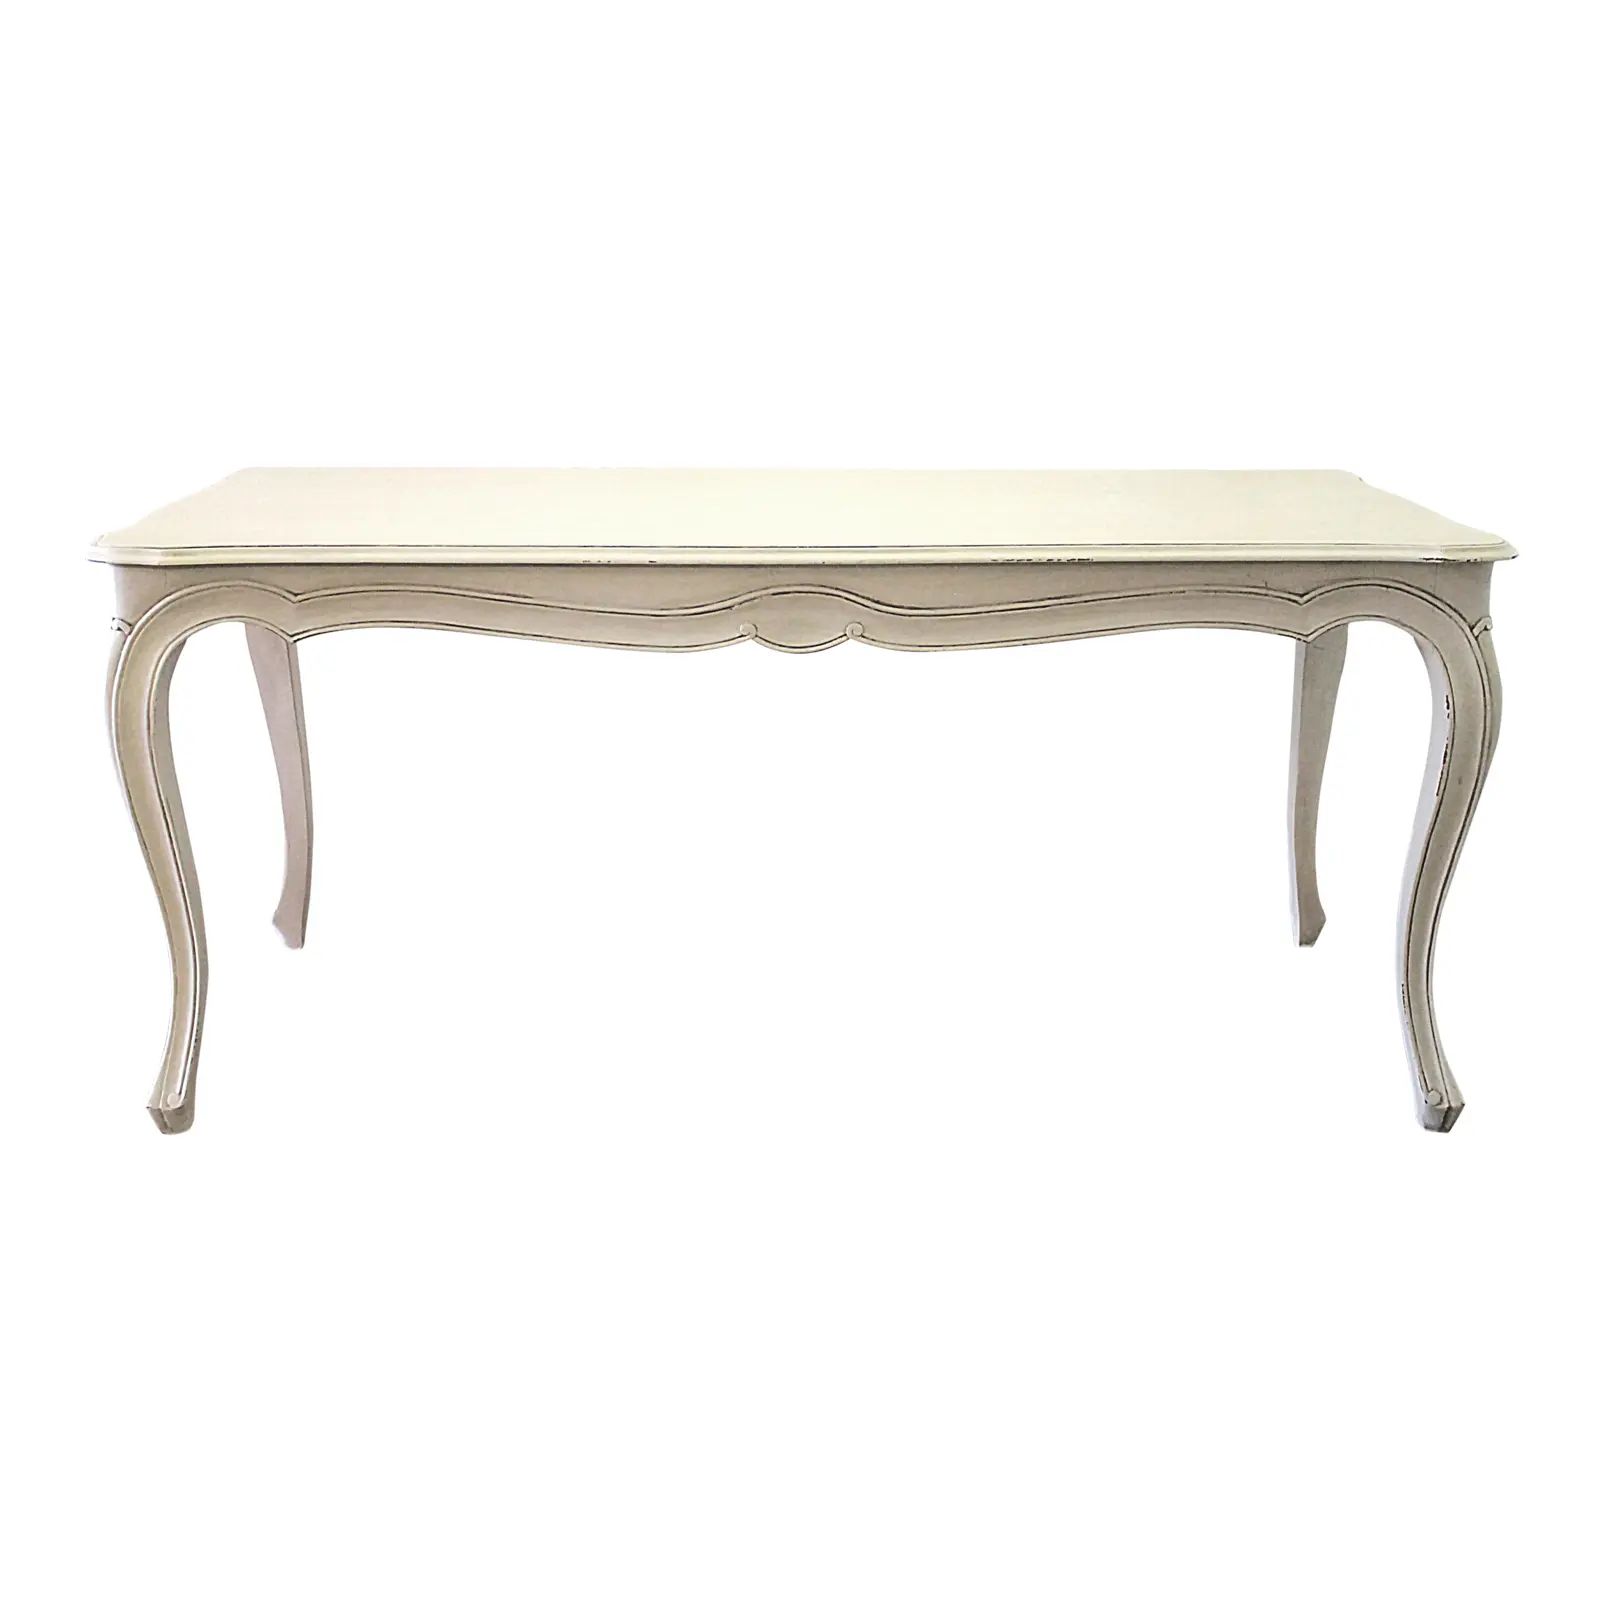 20th Century French Country Painted Dining Table With Drawers | Chairish